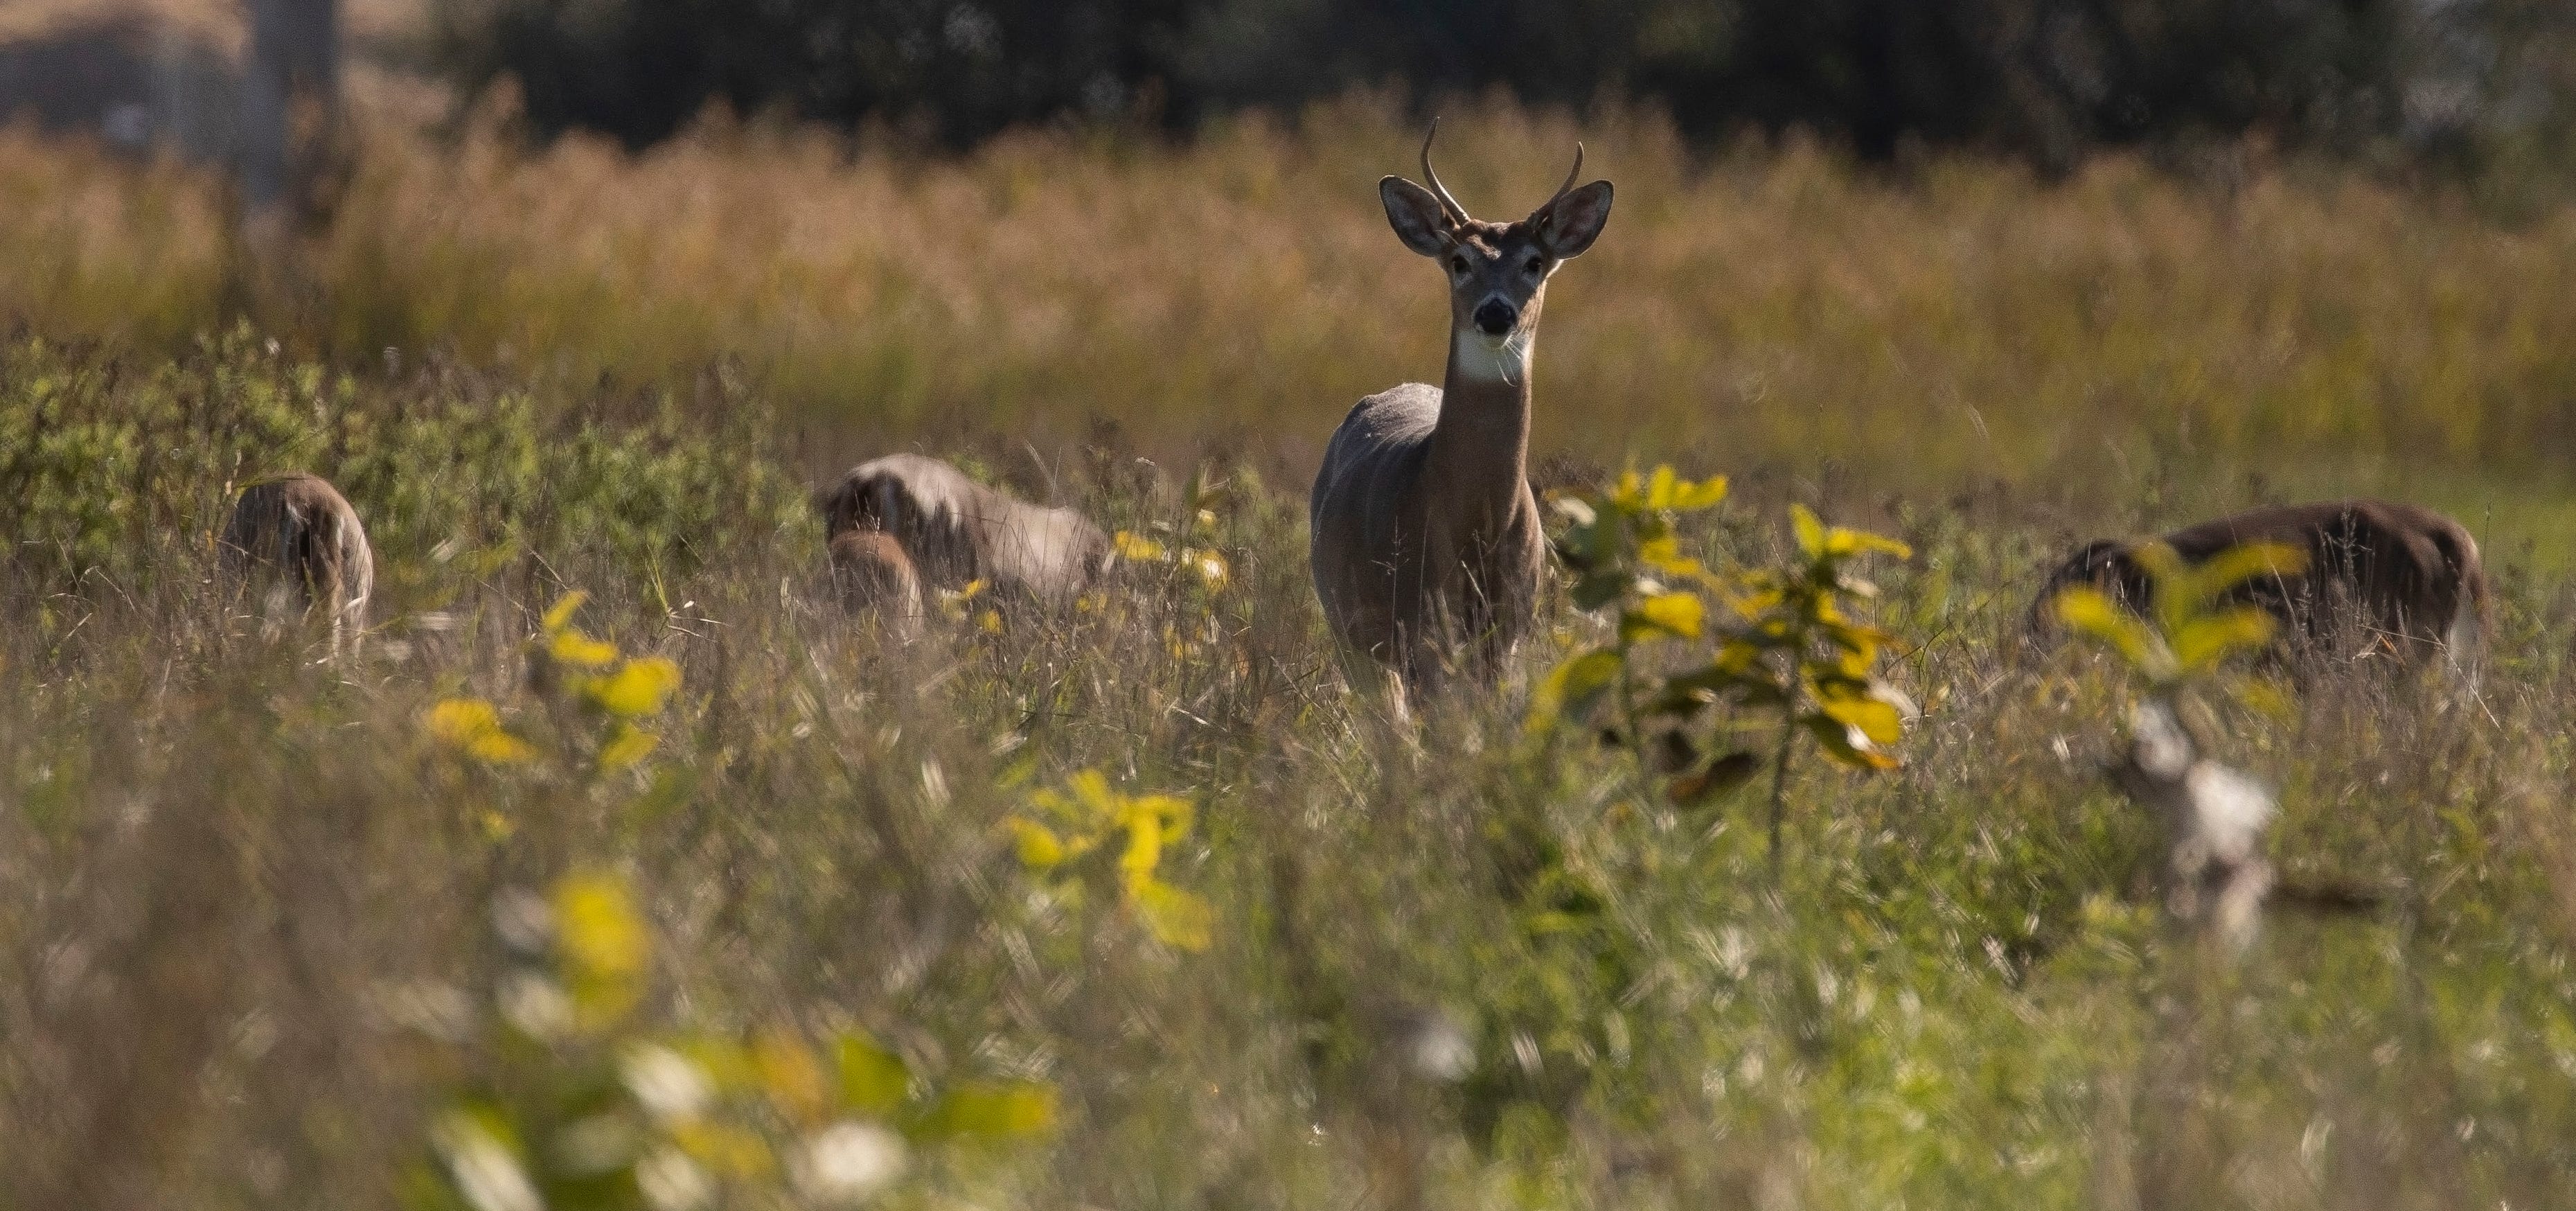 A group of deer feed on plants in a field along South Poseyville Rd. near Midland, MI, on Oct. 1, 2022.